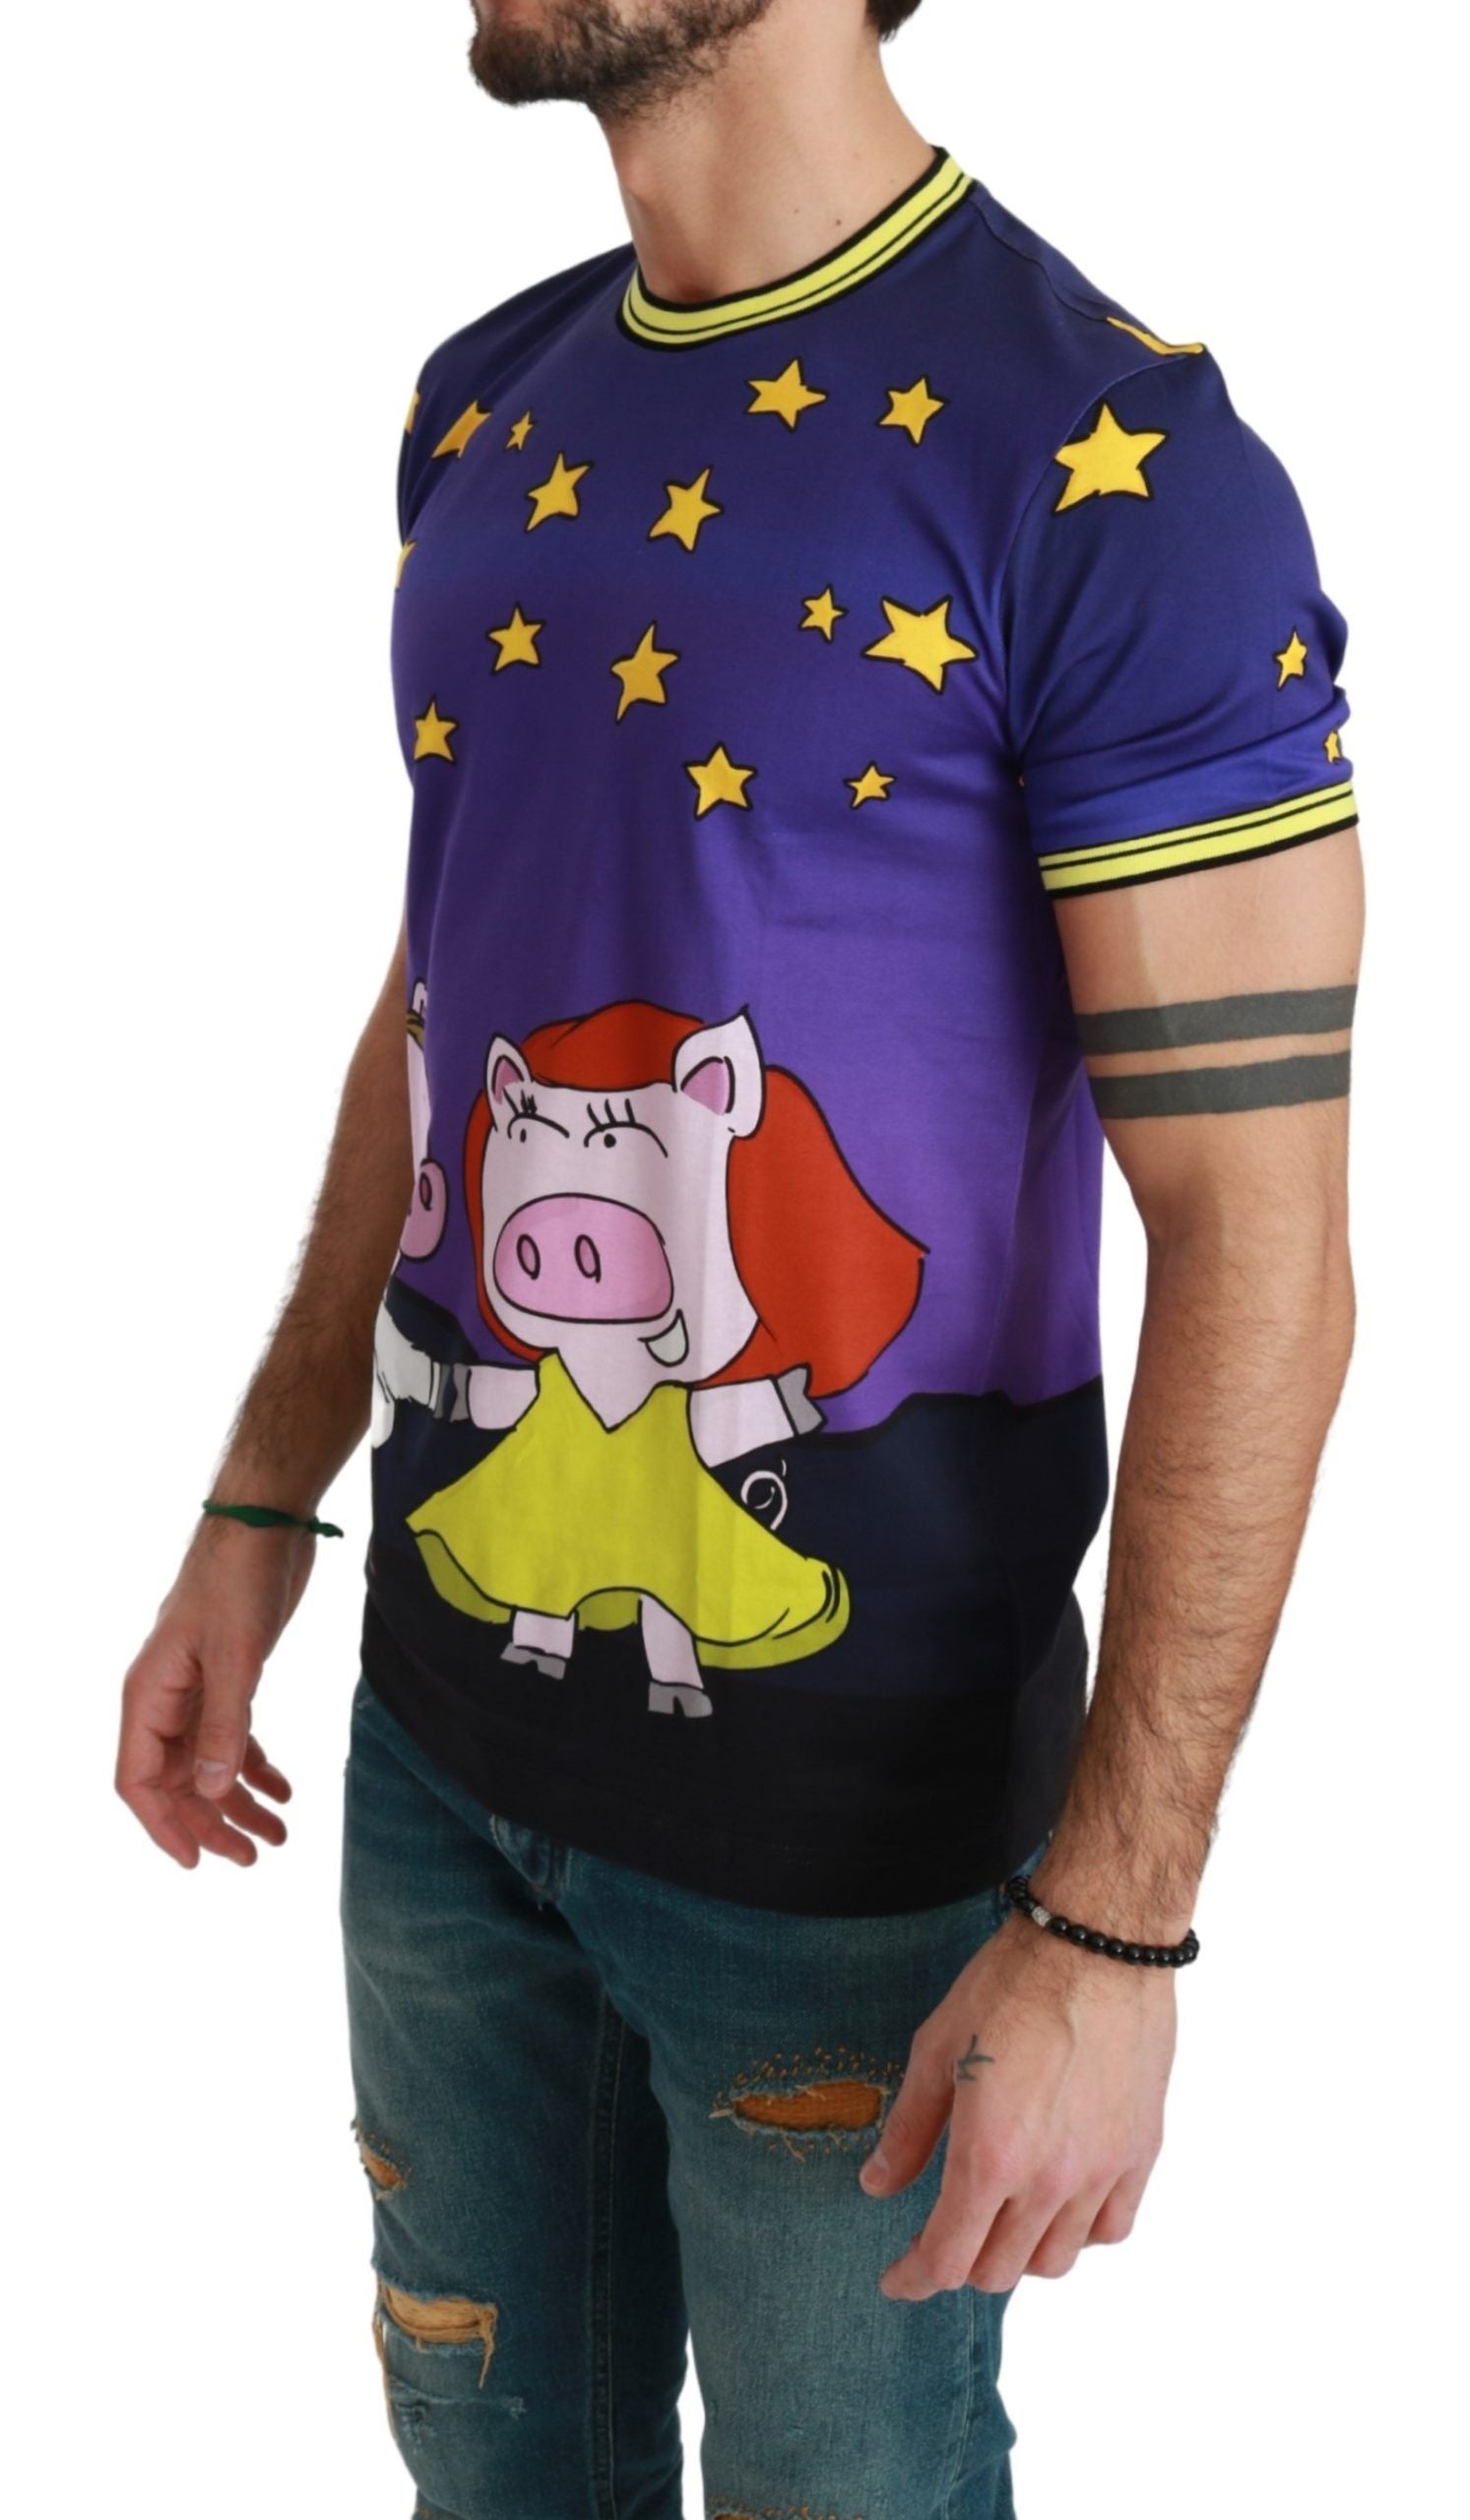 Dolce & Gabbana Purple  Cotton Top 2019 Year of the Pig  T-shirt GENUINE AUTHENTIC BRAND LLC